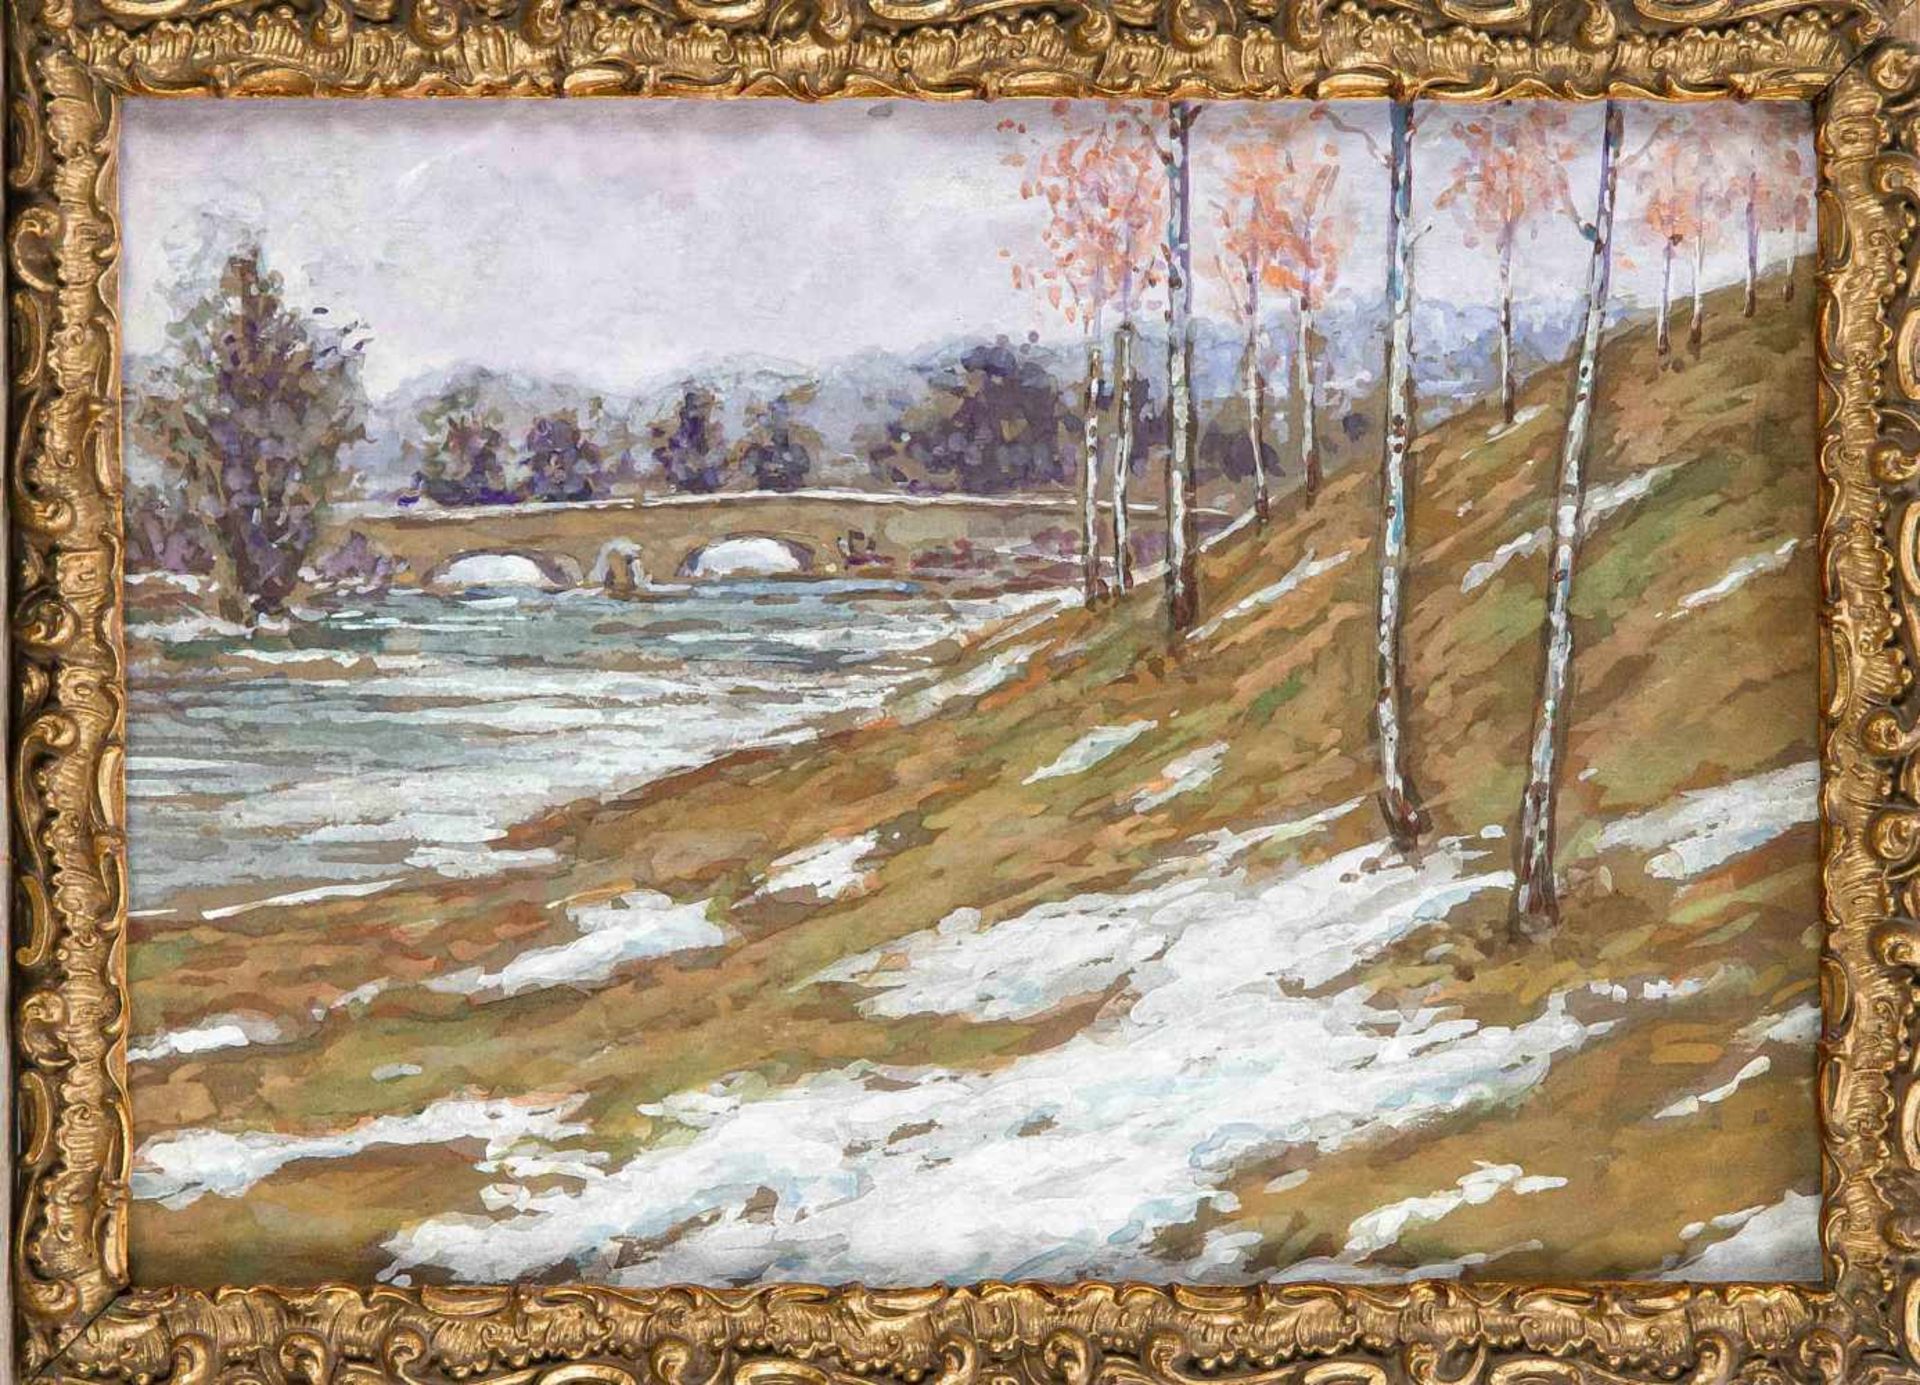 Anonymous, probably Russian painter from the 1st half of the 20th century, riversidelandscape with